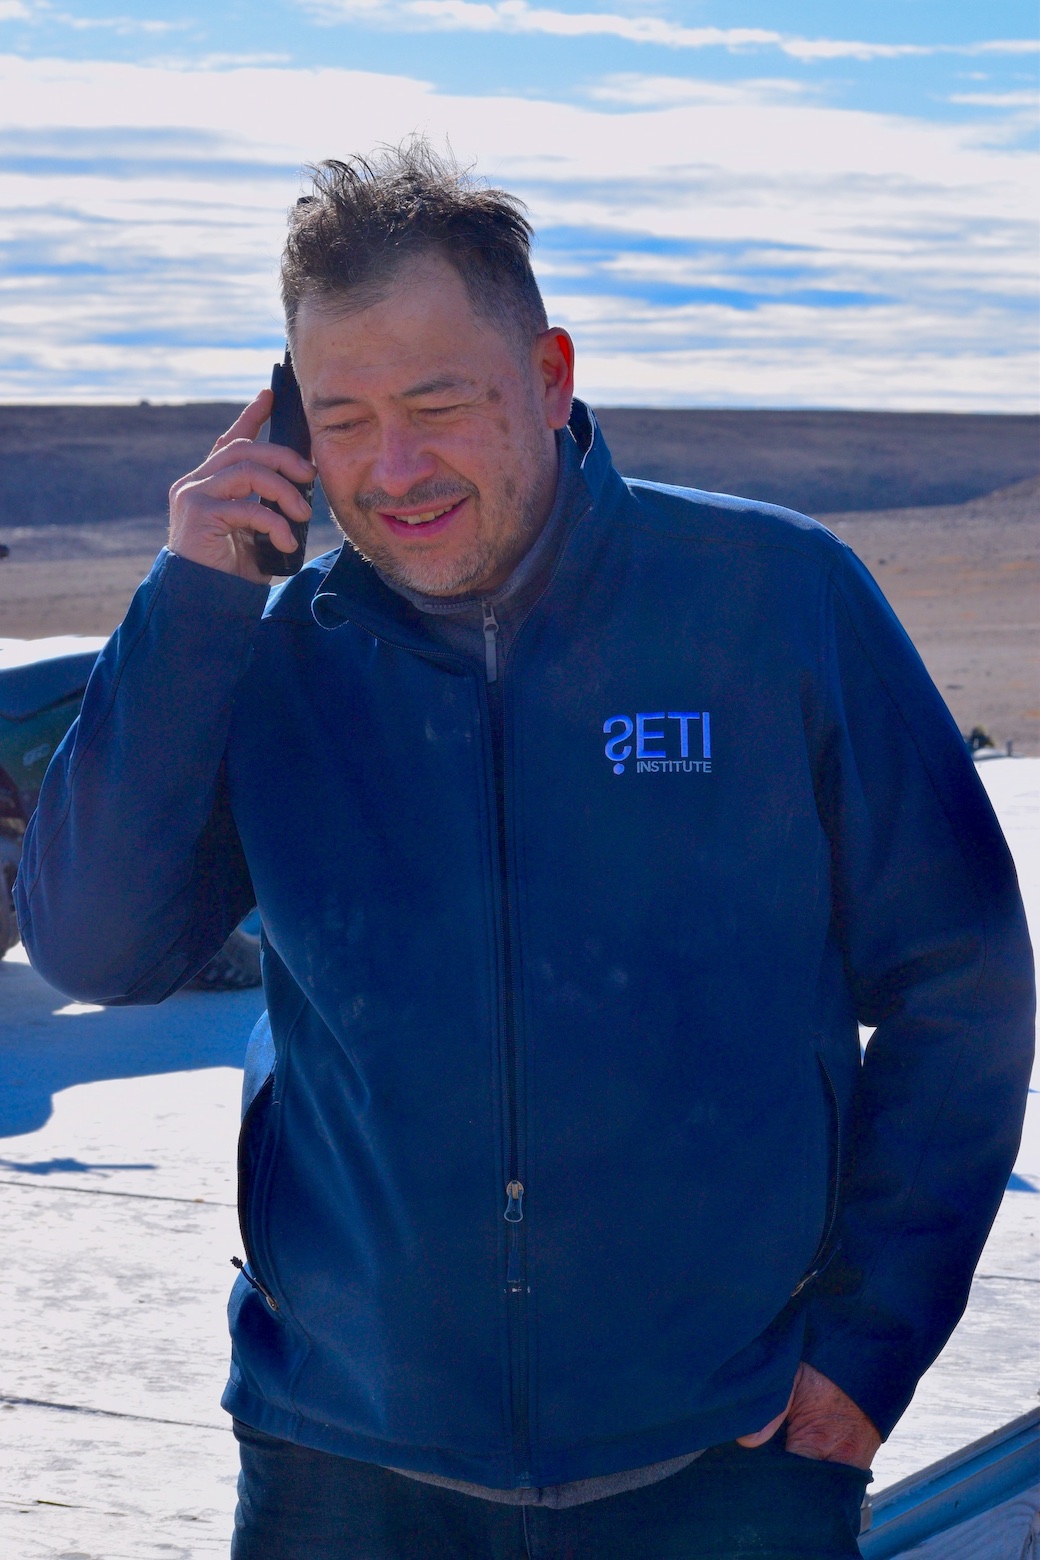 Pascal Lee in a blue sweater talking on a satellite phone.